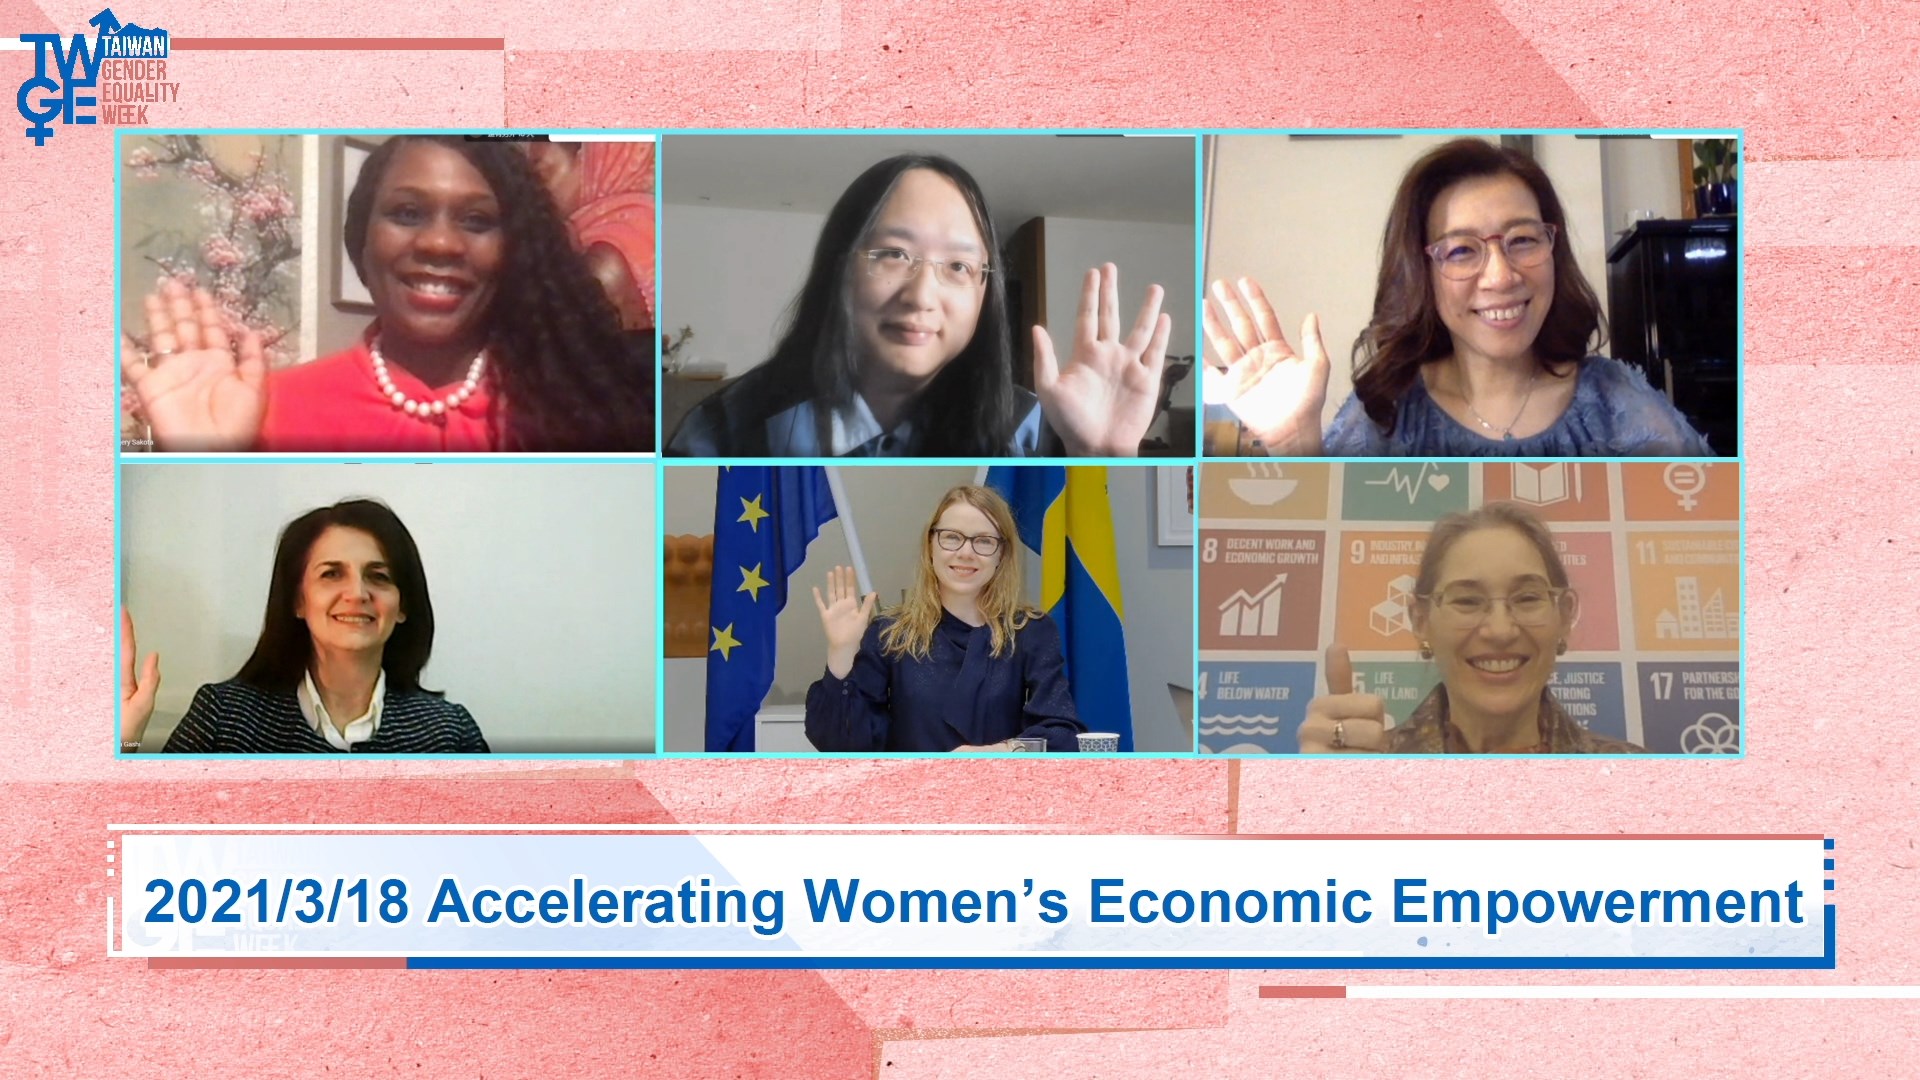 Accelerating Women's Economic Empowerment Webinar: The post-COVID world offers new models of economic justice and empowerment for women